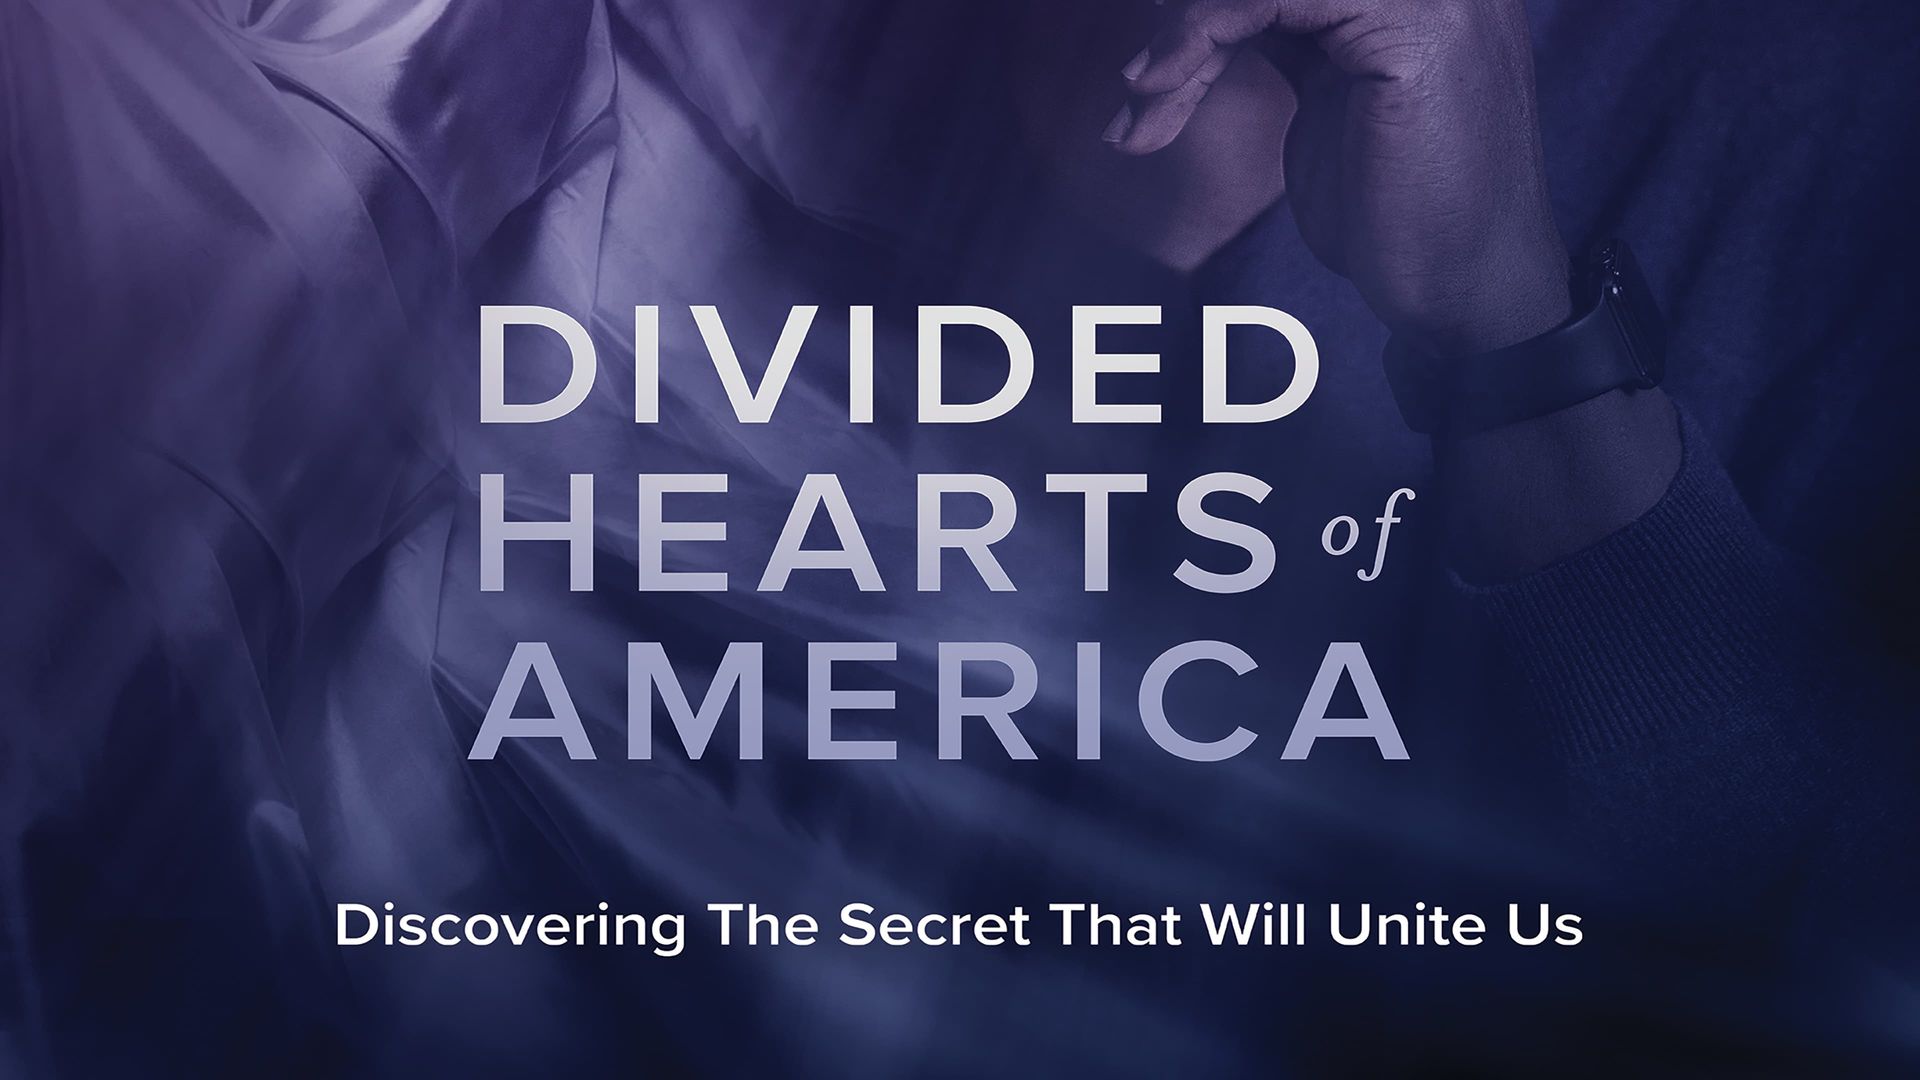 Divided Hearts of America background